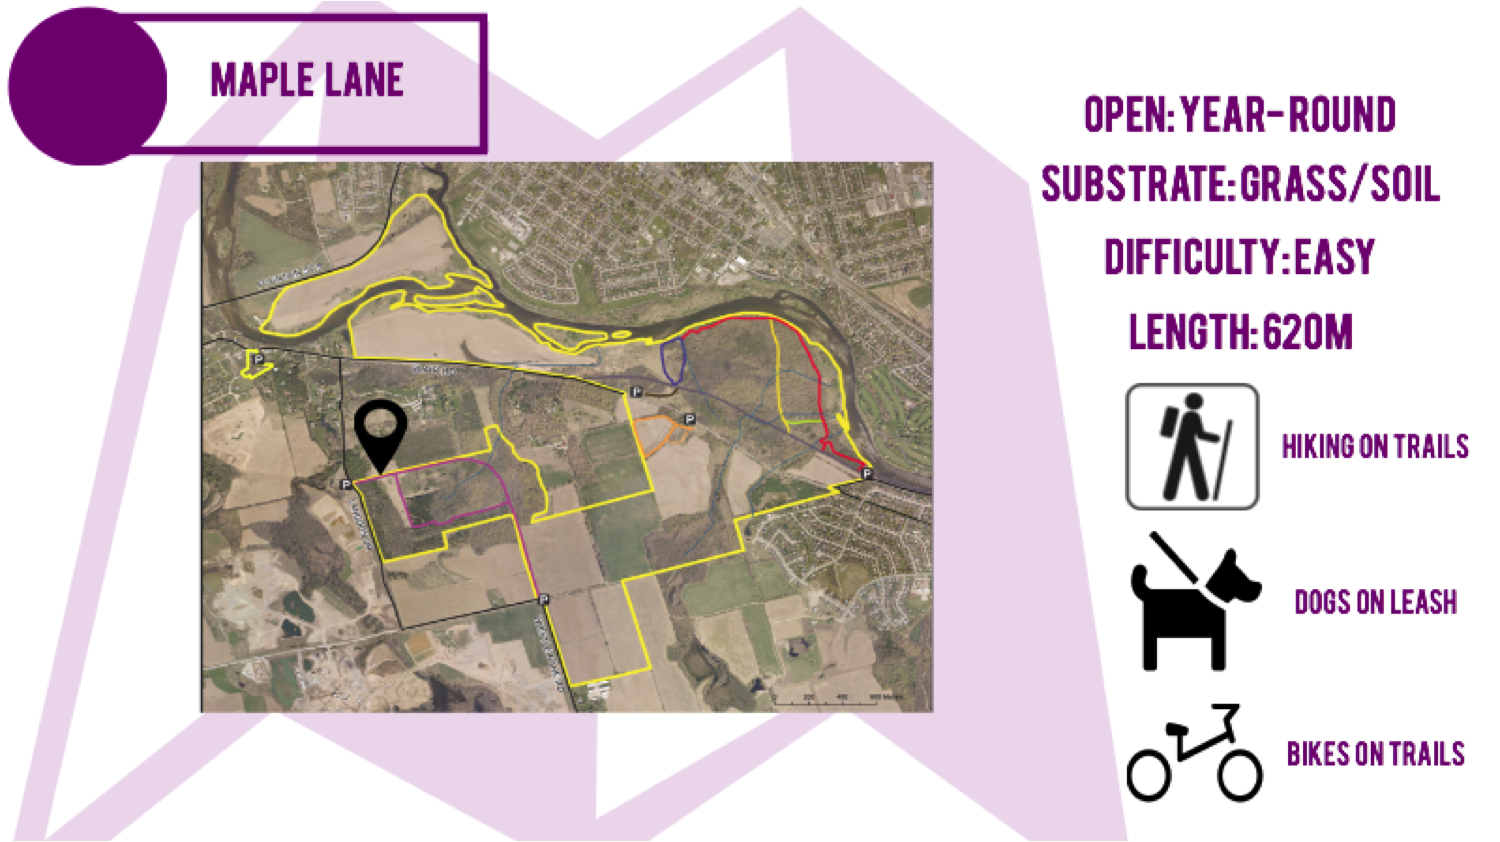 rare's property boundary. Maple Lane, Open: year-round, Substrate: Grass/Soil, Difficulty: Easy, Length: 620m, Hiking on trails, Dogs on leash, Bikes on trails